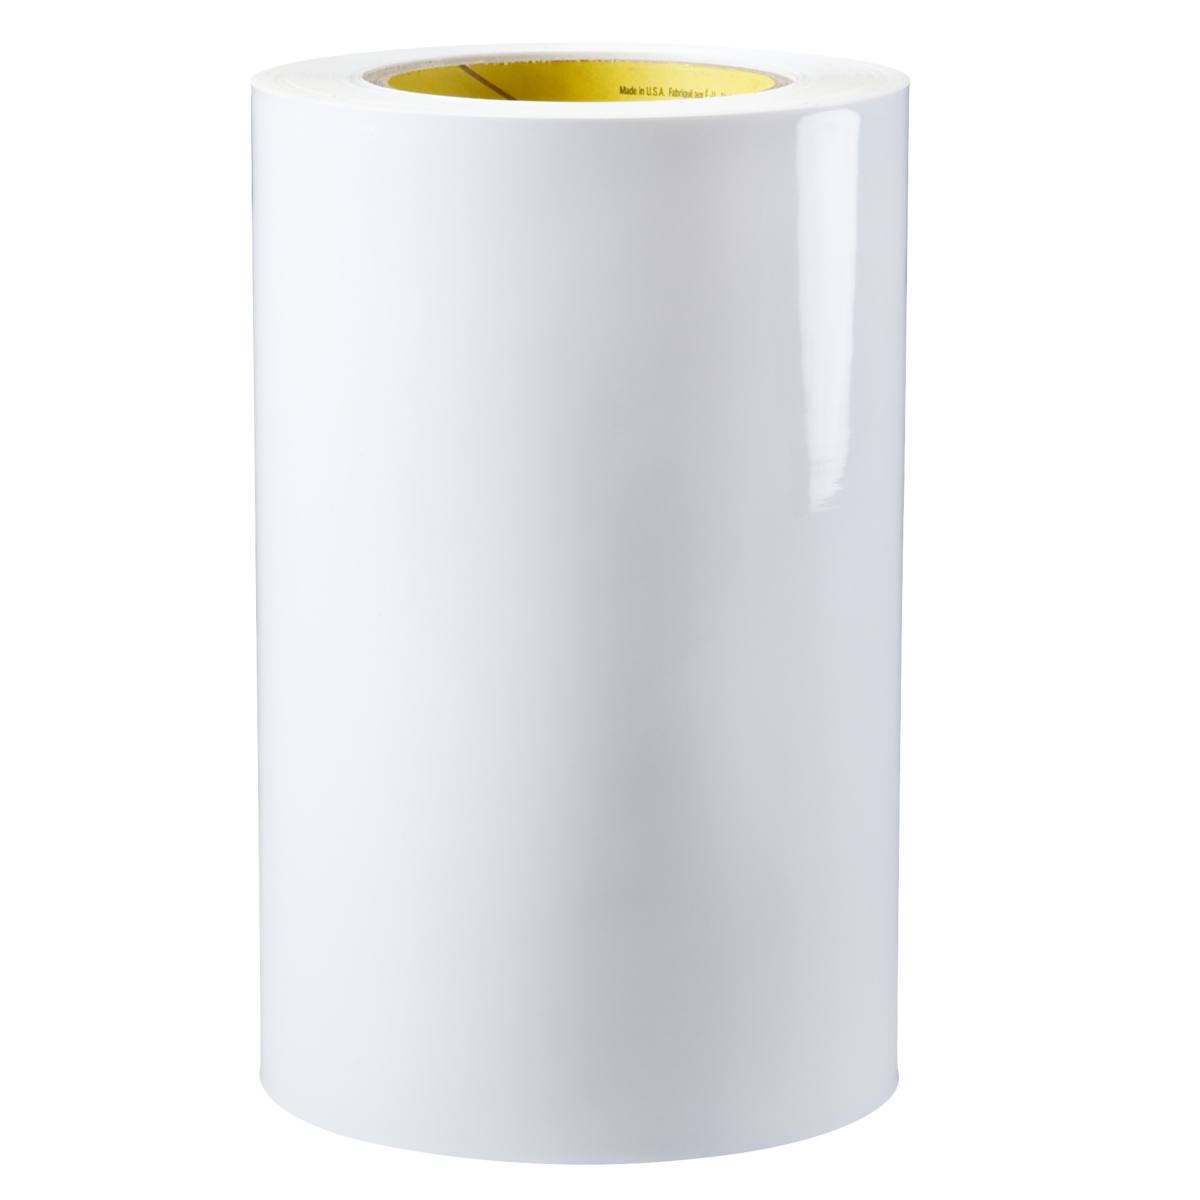 3M Wind Protection Tape W8751, transparent, 102mm x 33m, 0.36mm